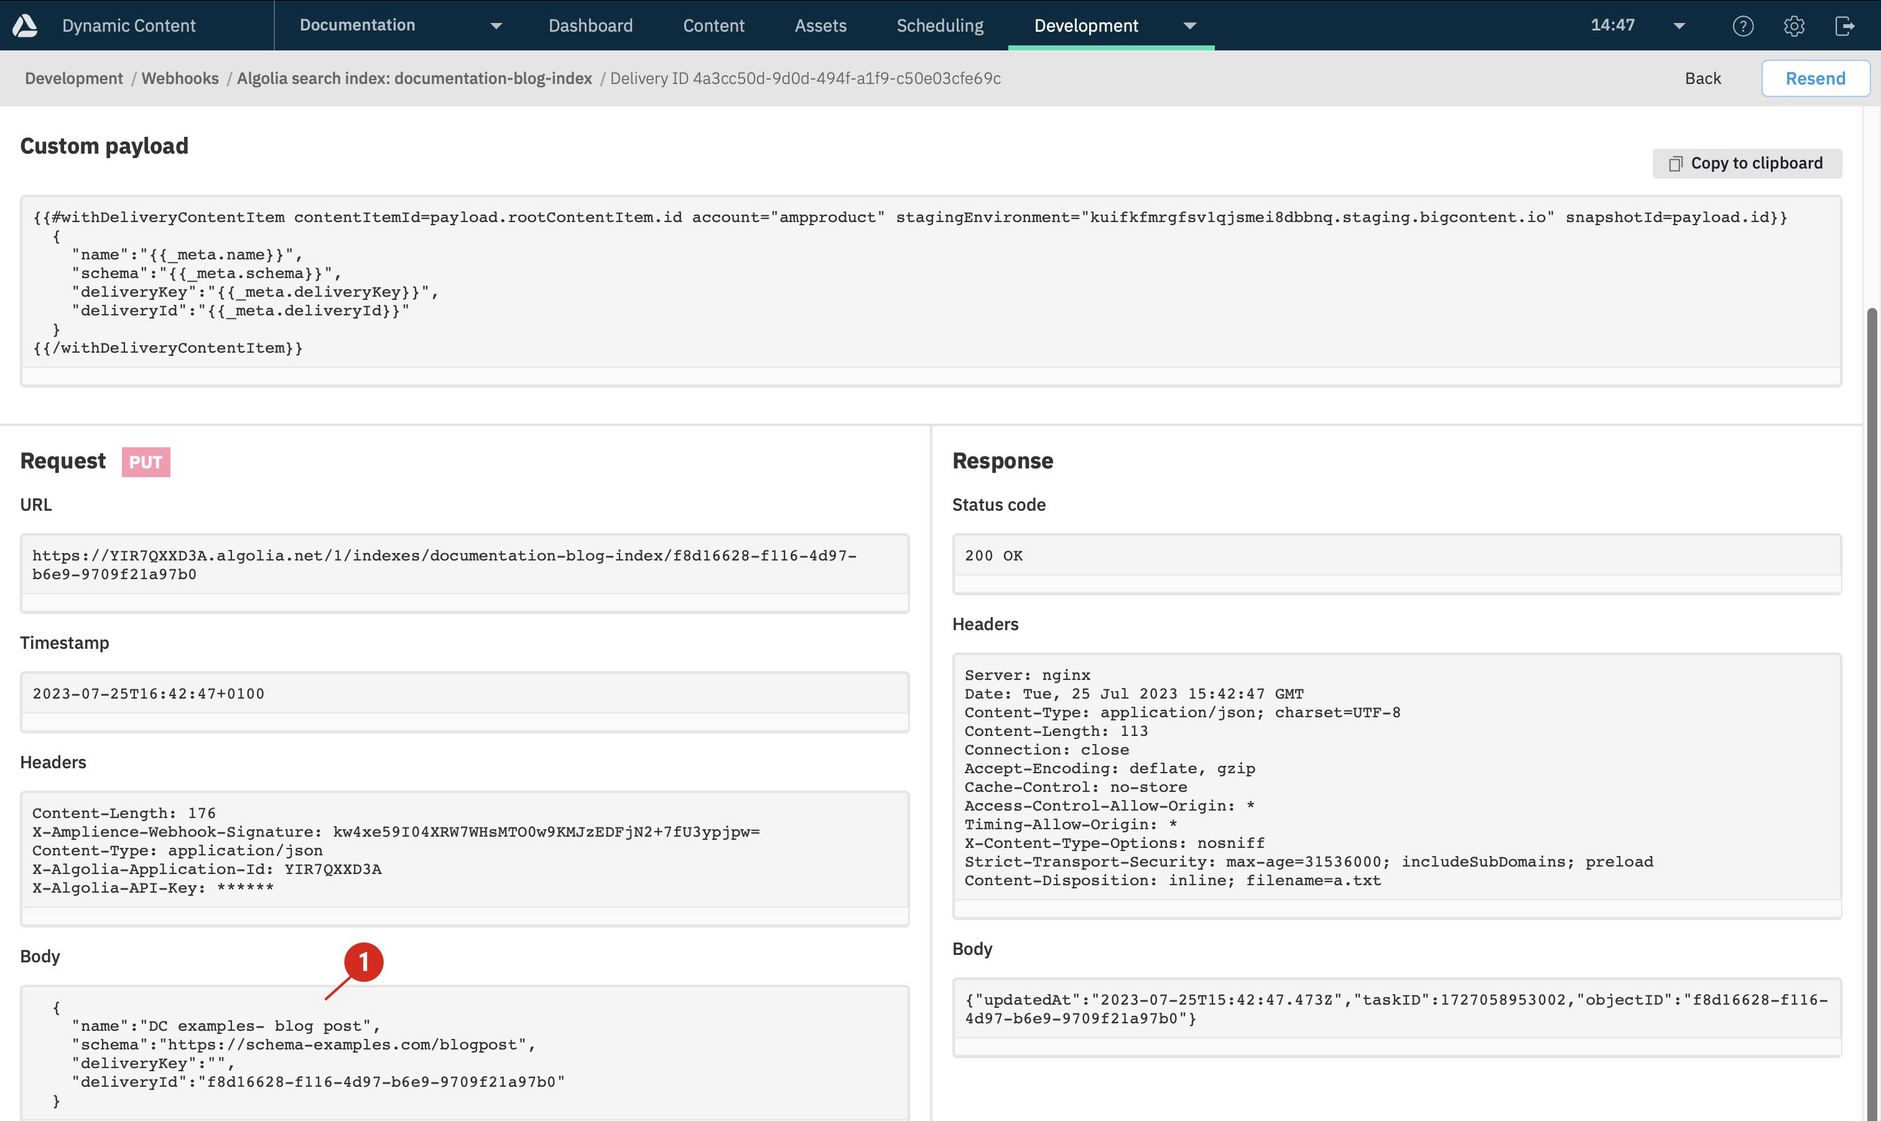 The webhook body shows the content of the Algolia record for the published content item